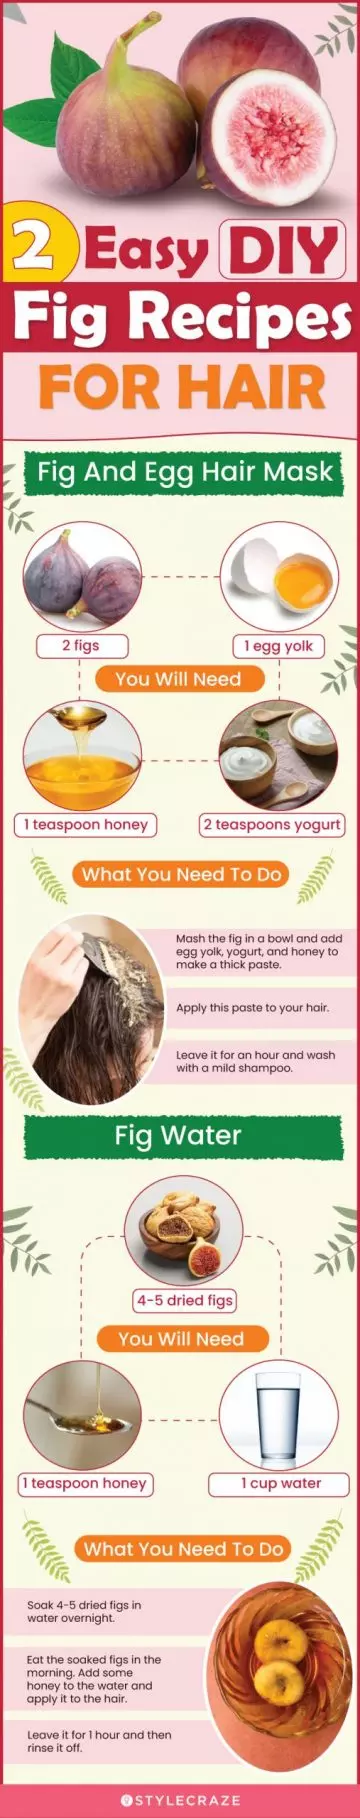 2 easy diy fig recipes for hair (infographic)